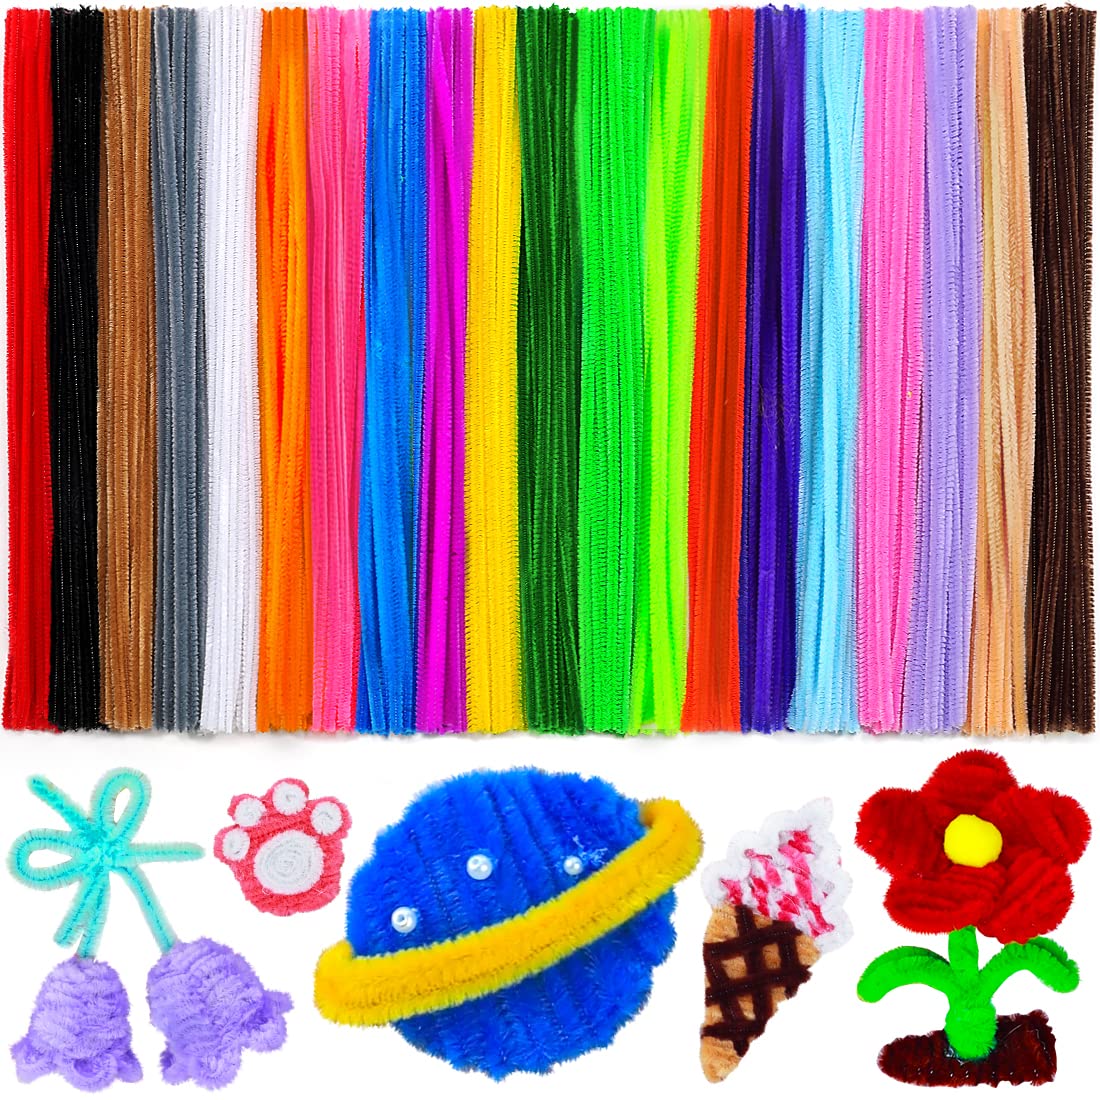 12 Wired Craft Metallic Chenille Stems - Pipe Cleaners (25 Pcs) Red